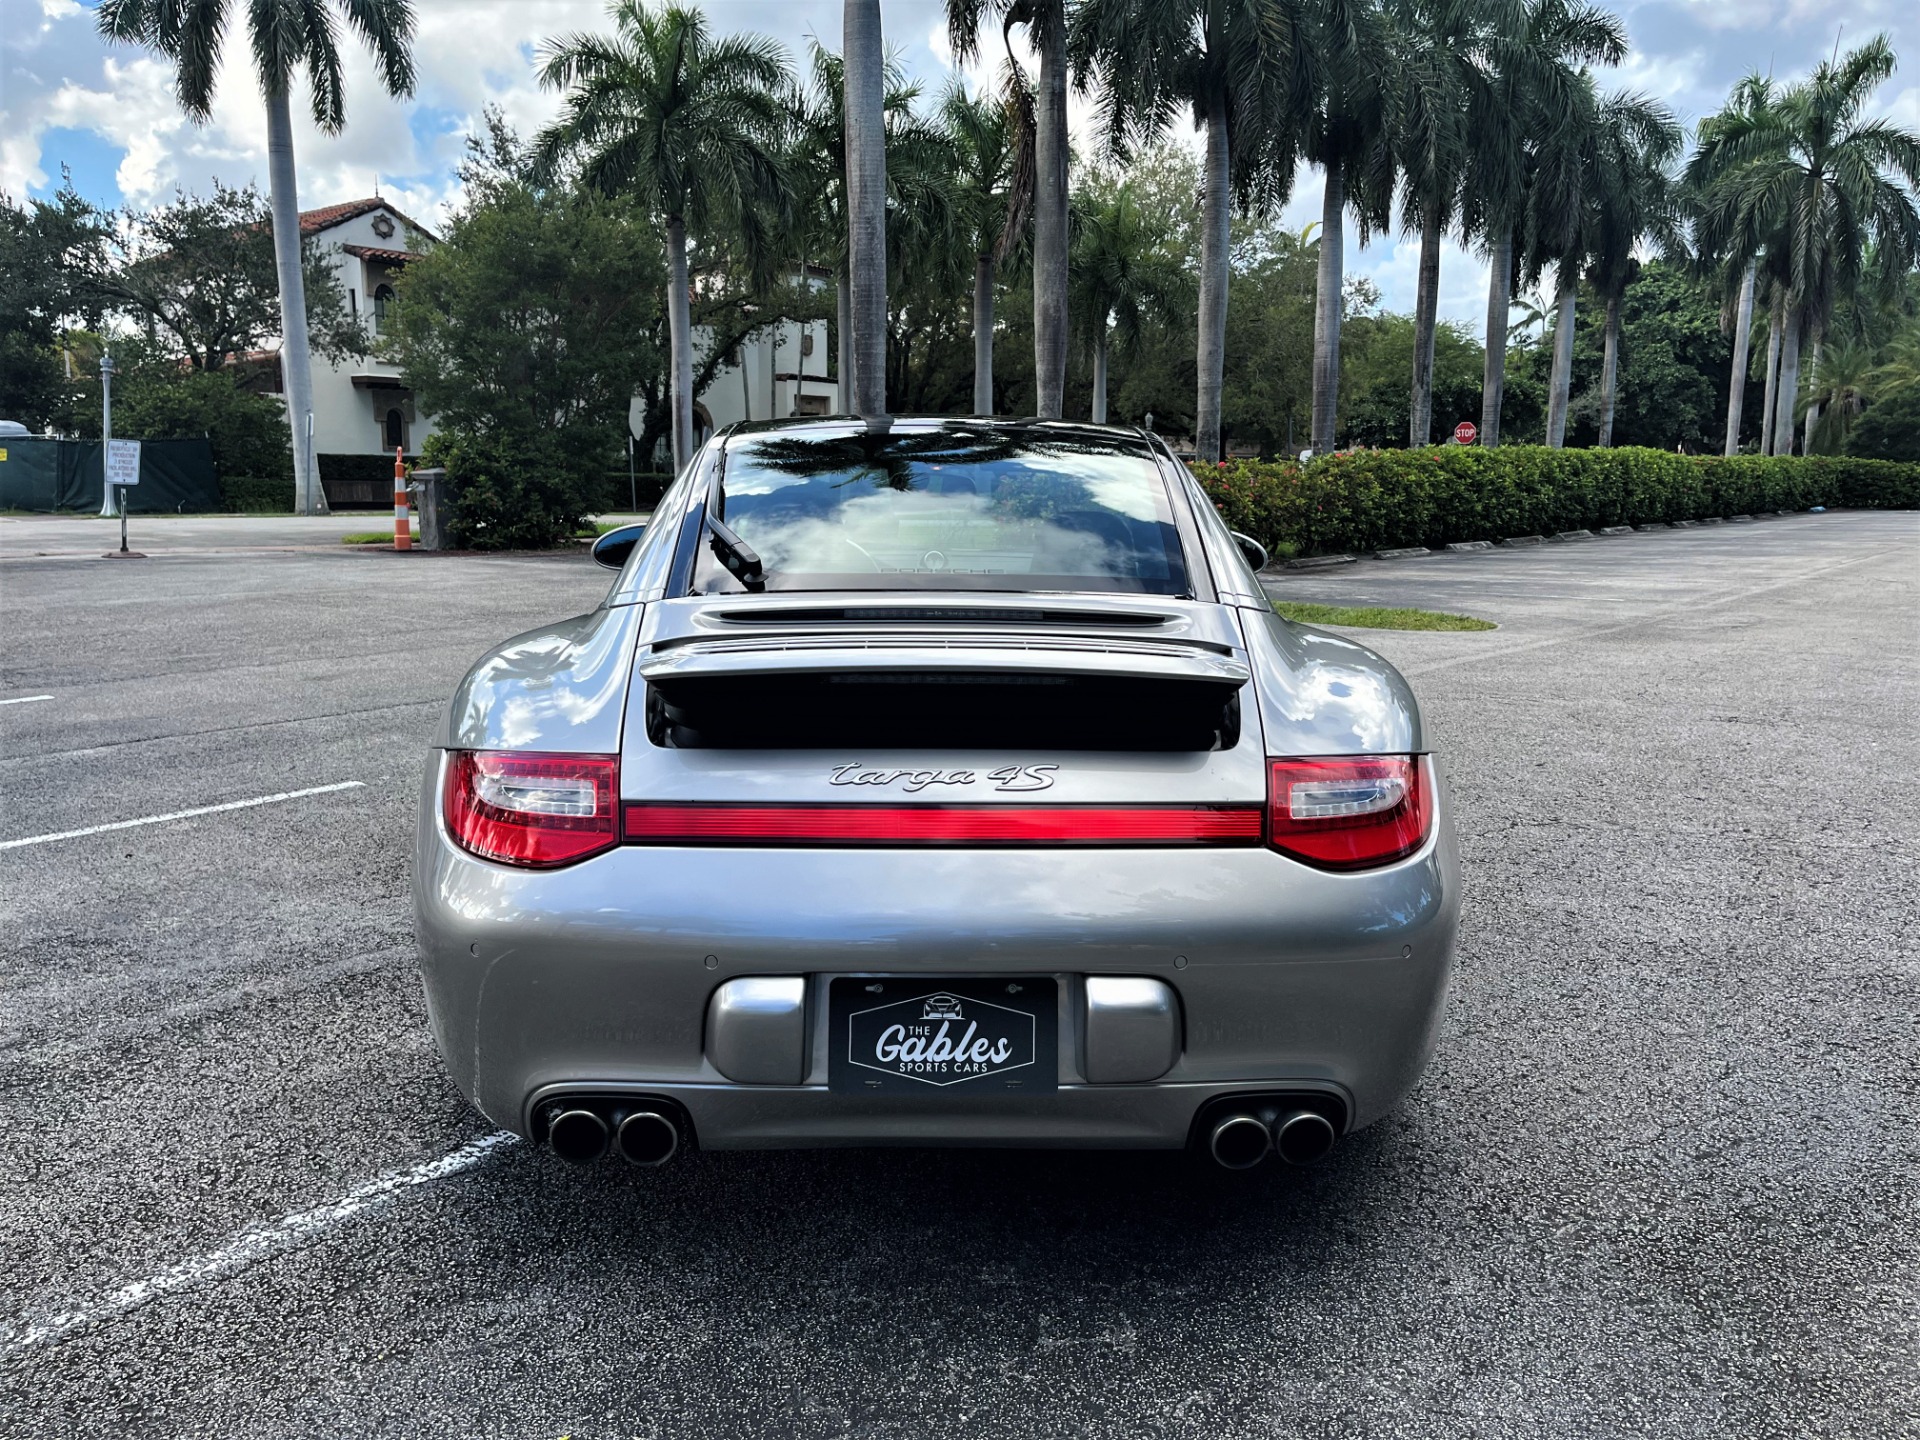 Used 2011 Porsche 911 Targa 4S for sale $85,850 at The Gables Sports Cars in Miami FL 33146 2